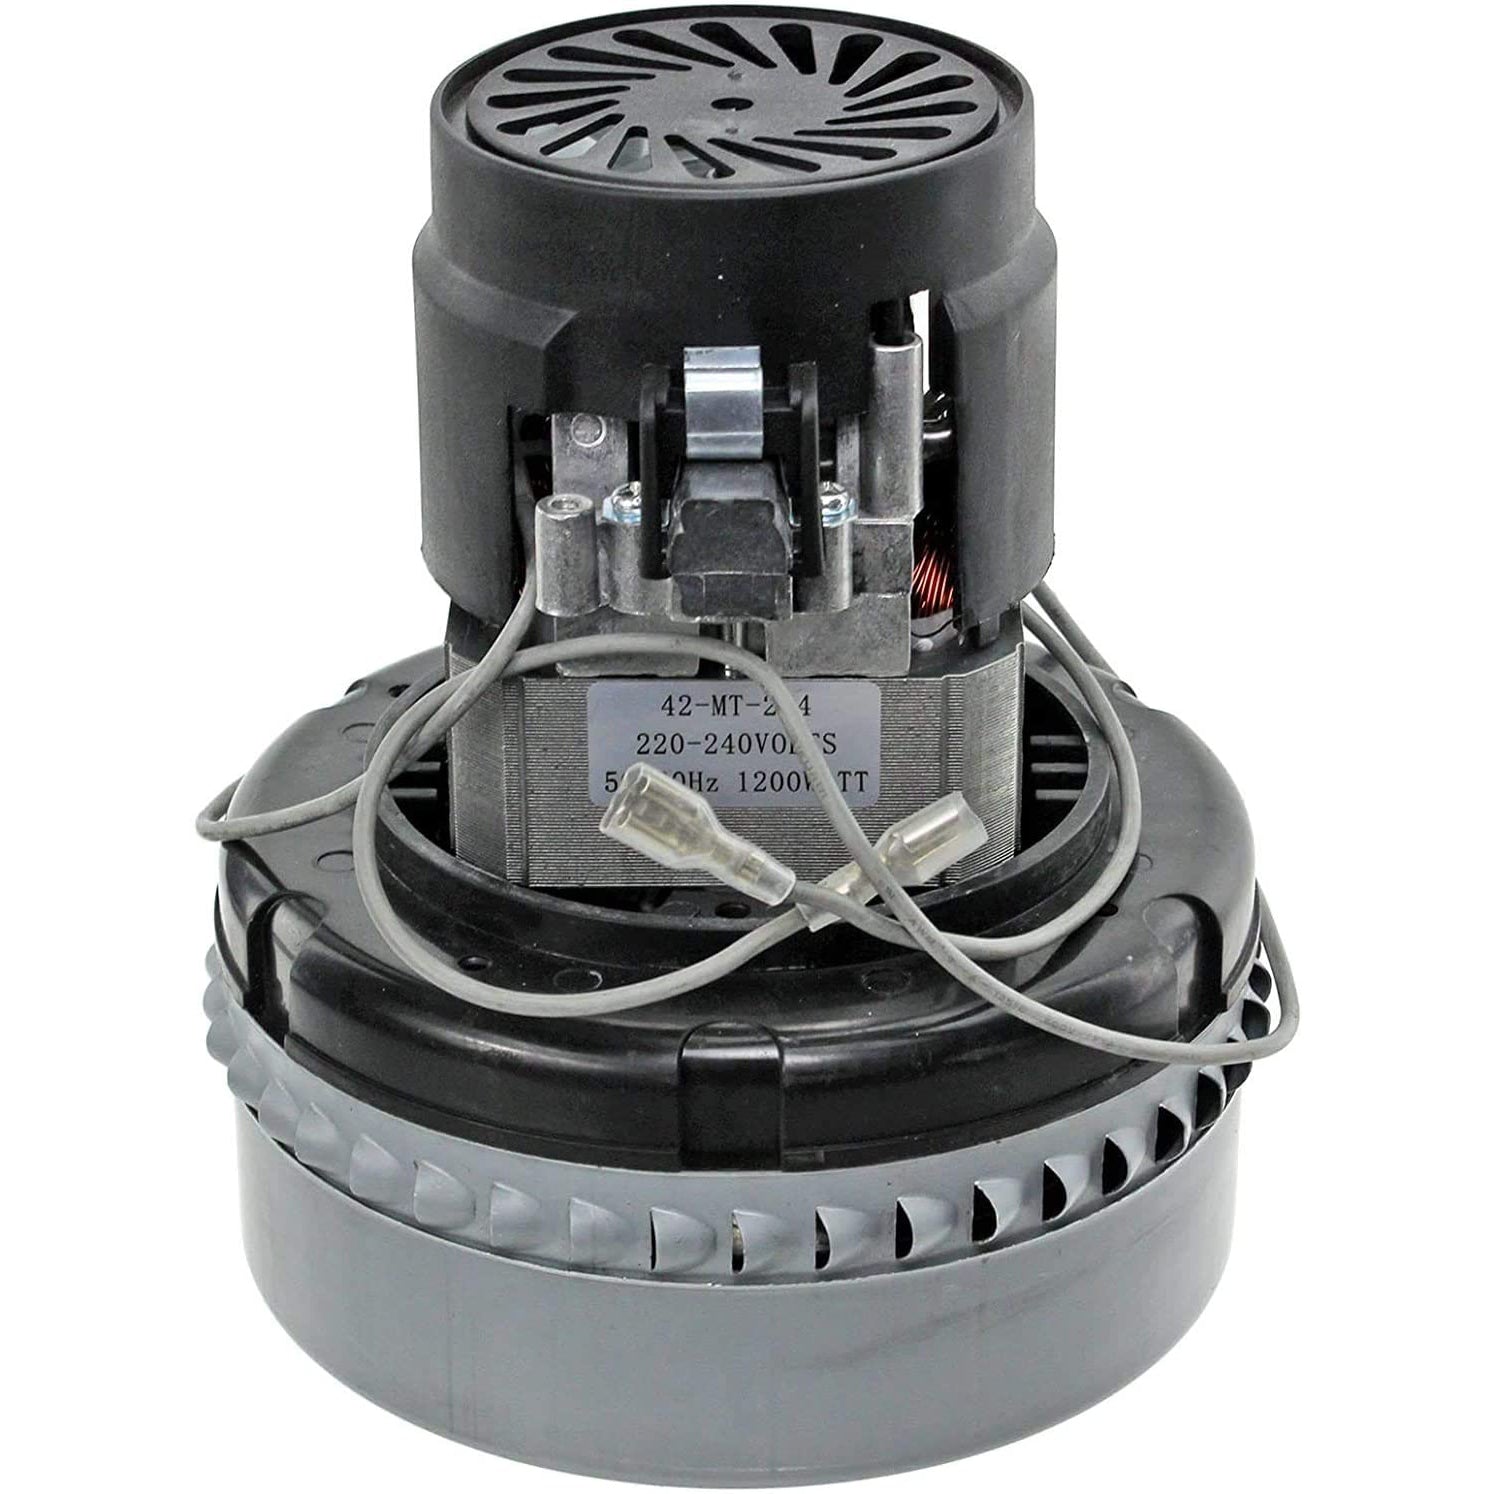 Vacuum Cleaner Motor for NUMATIC HENRY HETTY 1200W 2 Stage Bypass (240V, Class F)